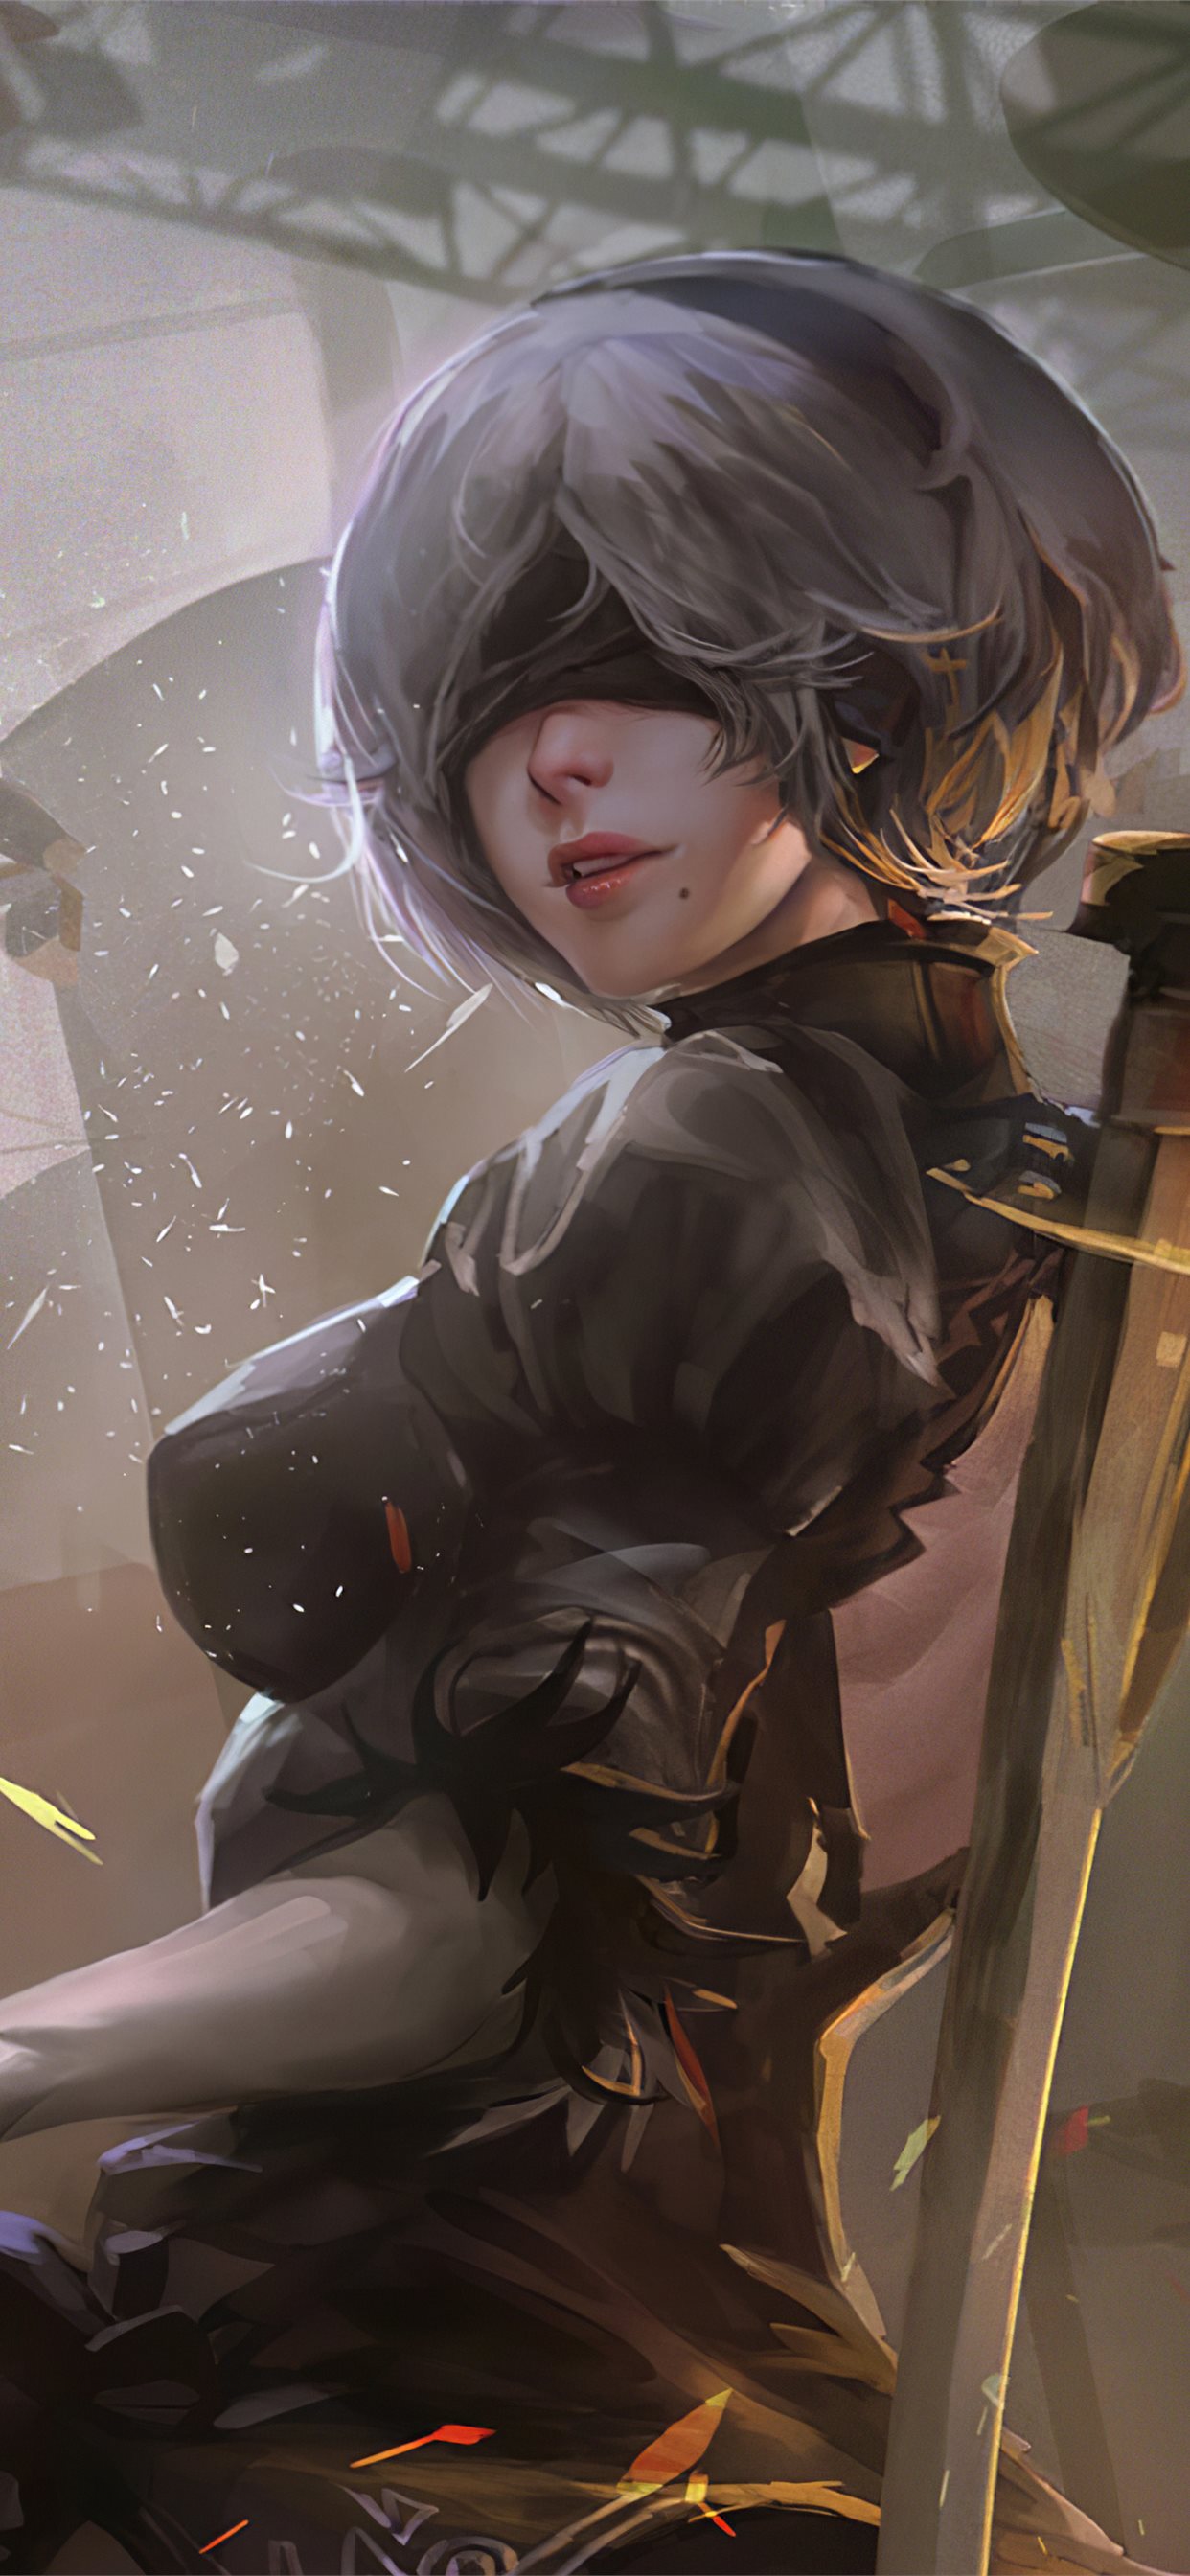 2b Nier Automata 4k Iphone X Wallpapers Free Download